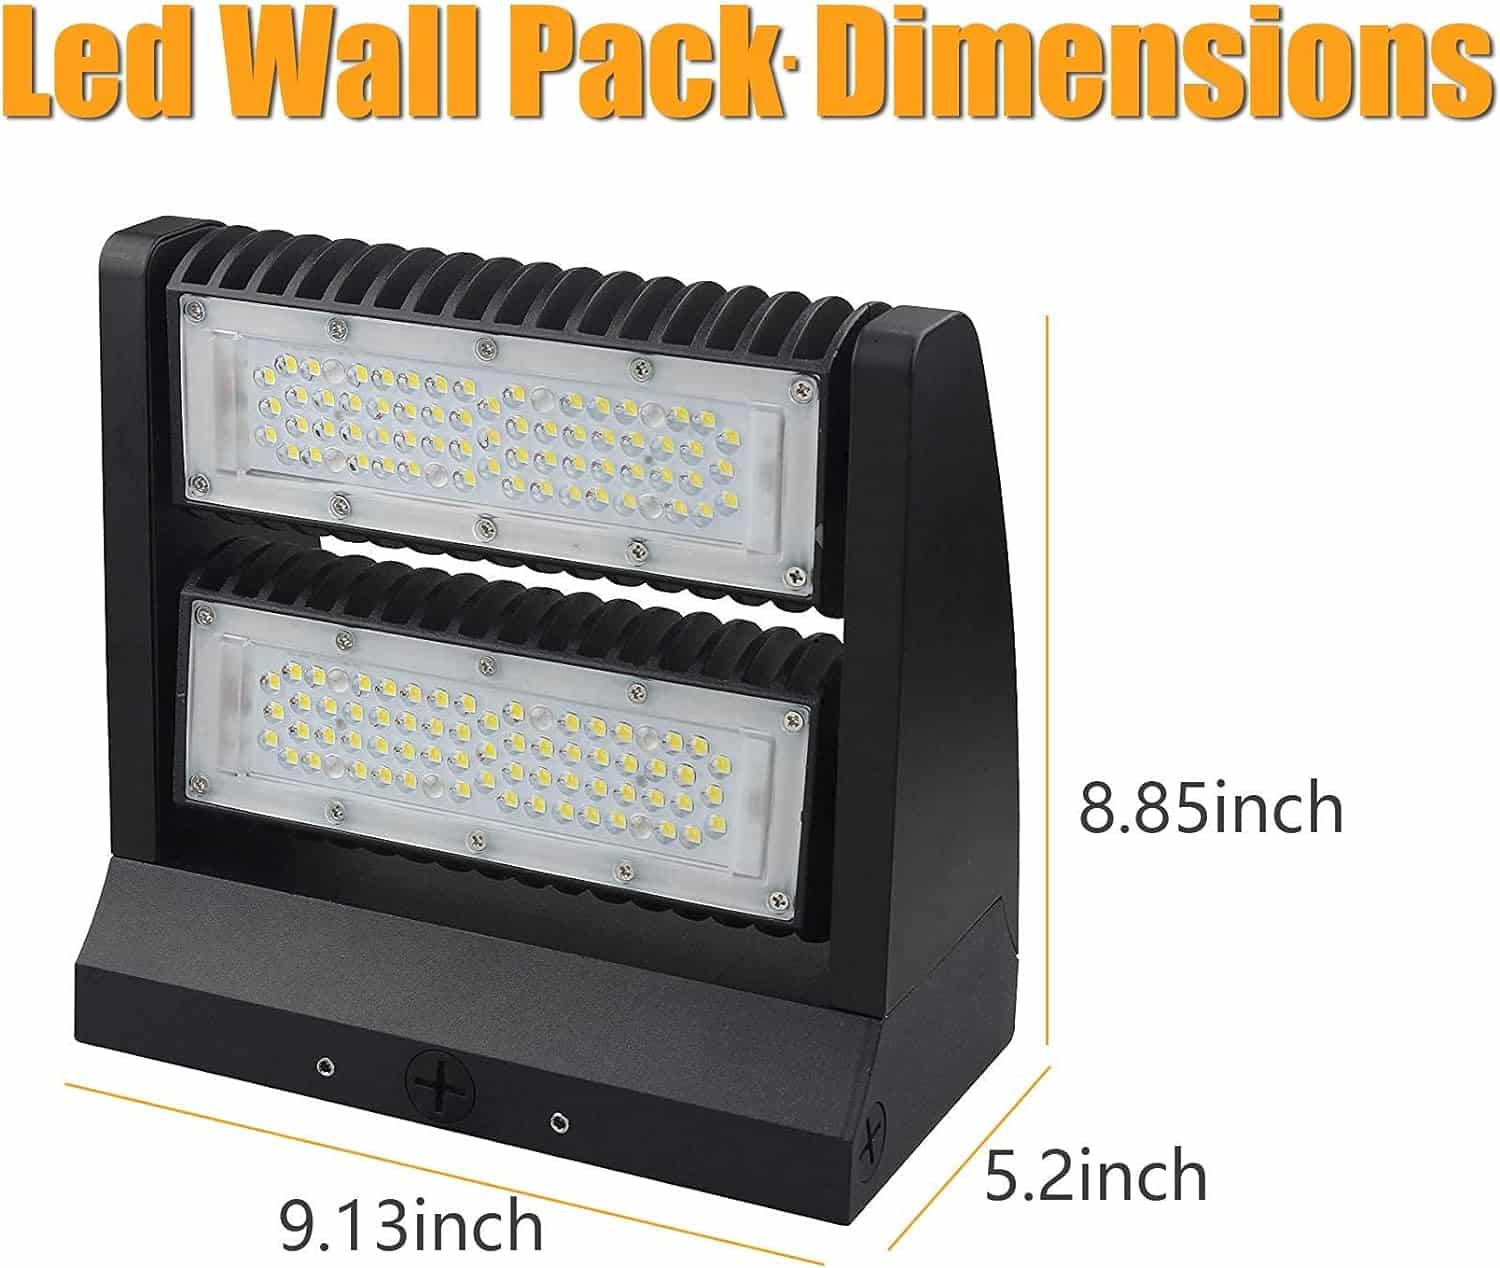 dephen 120W LED Wall Pack 5000K 16200lm Rotatable 2 Heads Wall Light 60-120 Beam Angle Adjustable IP65 Outdoor Commercial Flood Lighting Fixture - UL Listed